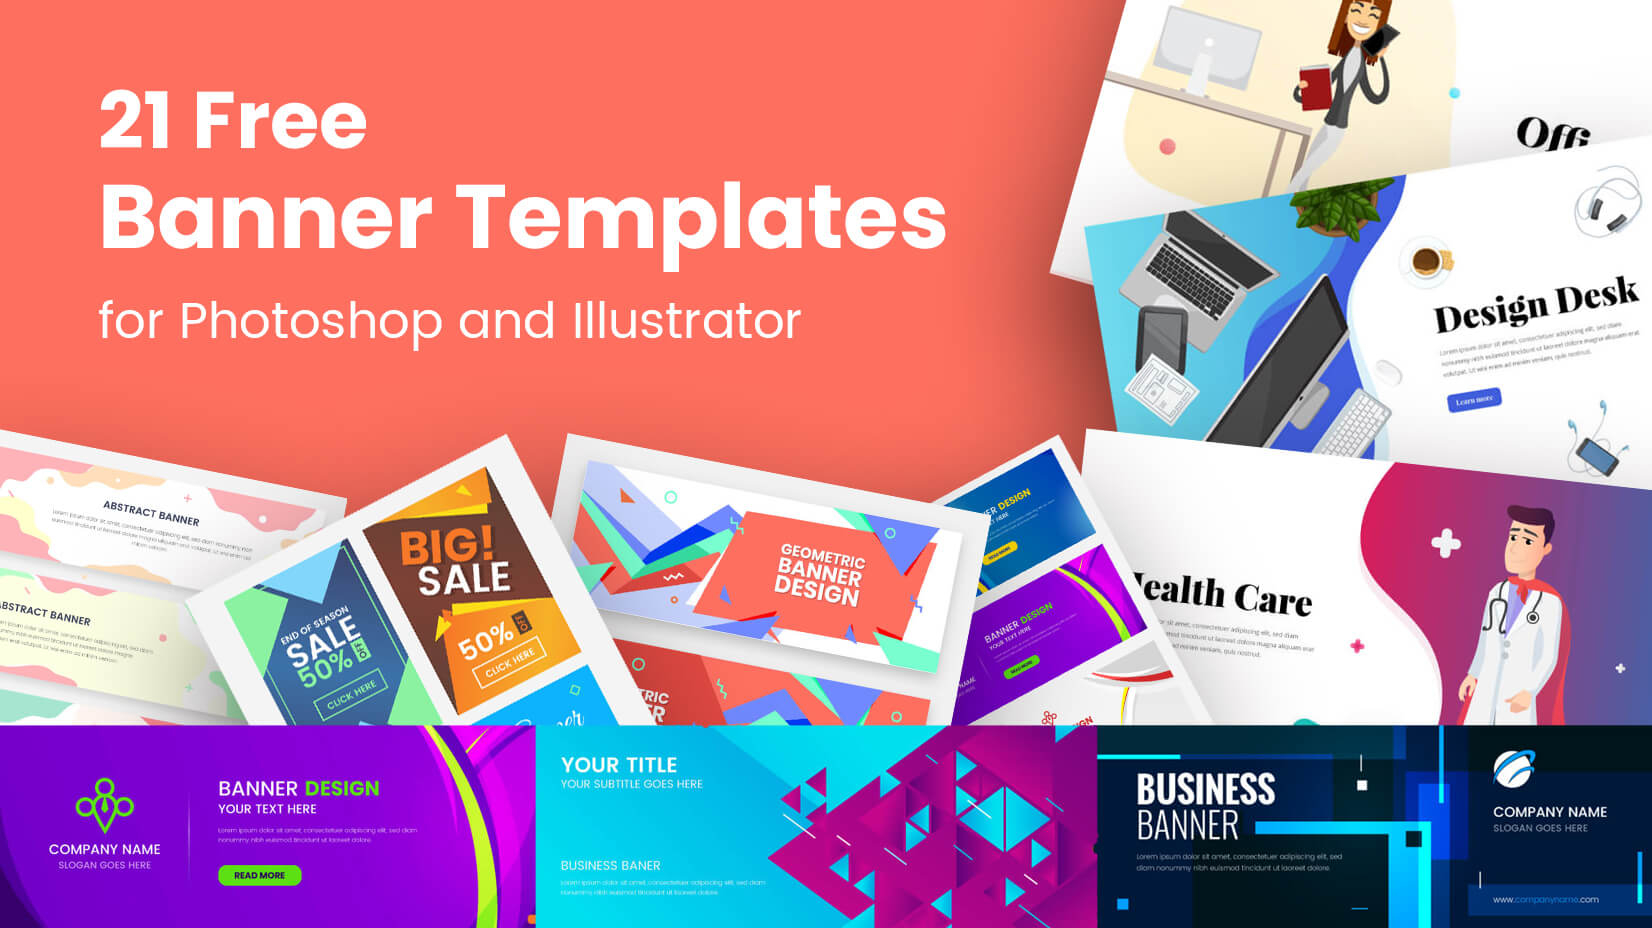 10 Free Banner Templates for Photoshop and Illustrator Inside Free Website Banner Templates Download